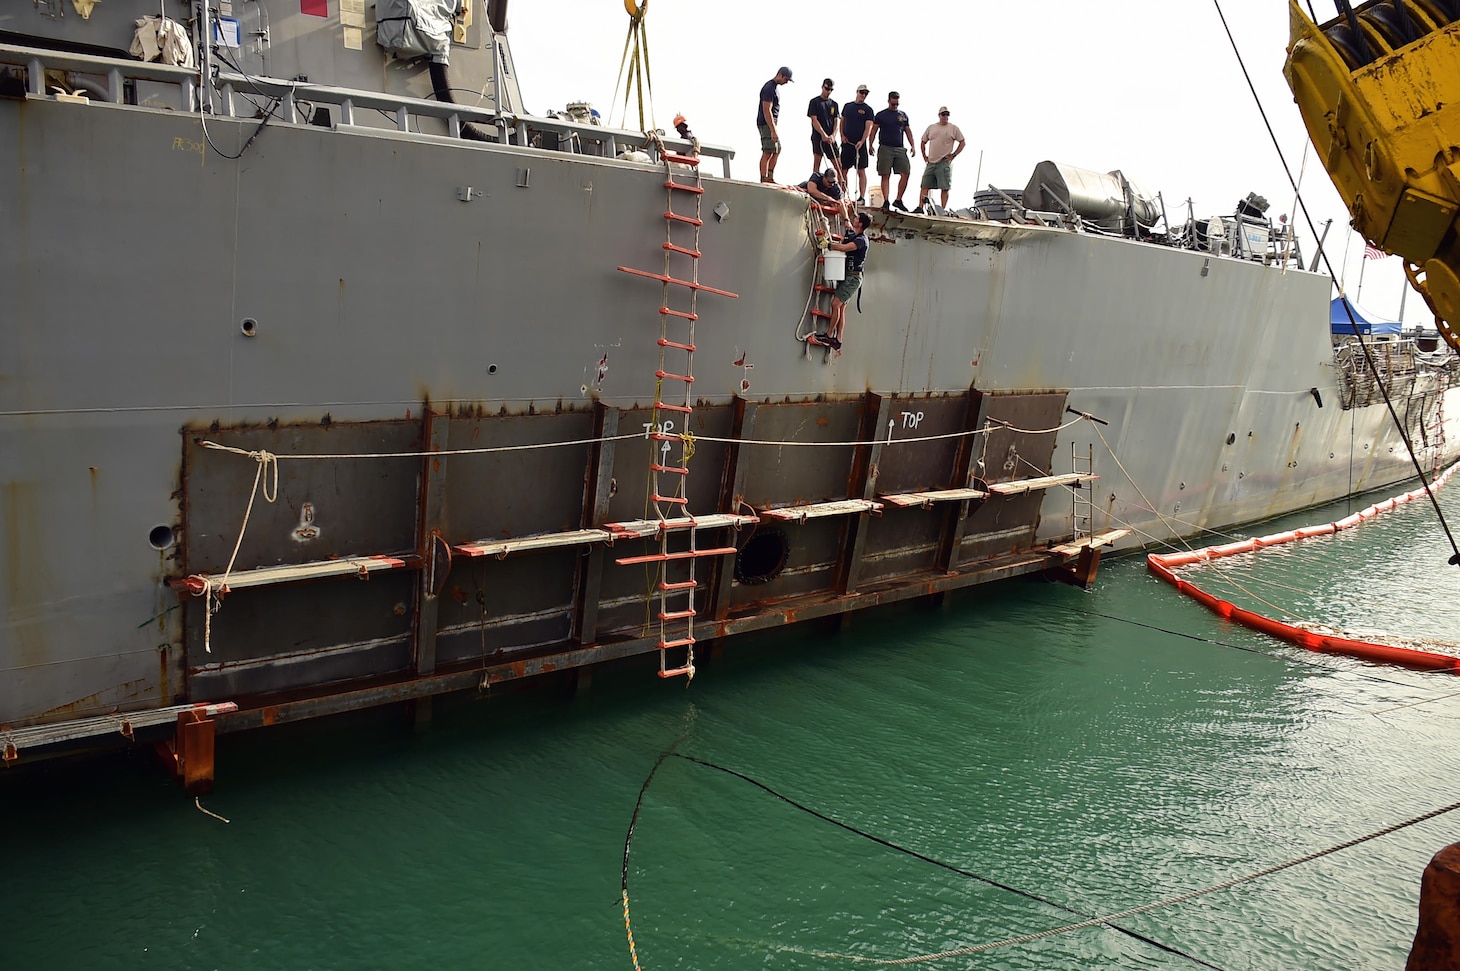 CHANGI NAVAL BASE, Singapore (September 21, 2017) A temporary patch has been welded to the collision site aboard USS John S. McCain (DDG 56).  Significant damage to the hull resulted in flooding to nearby compartments, including crew berthing, machinery, and communications rooms as a result of a collision with the merchant vessel Alnic MC while underway east of the Straits of Malacca and Singapore on Aug. 21.